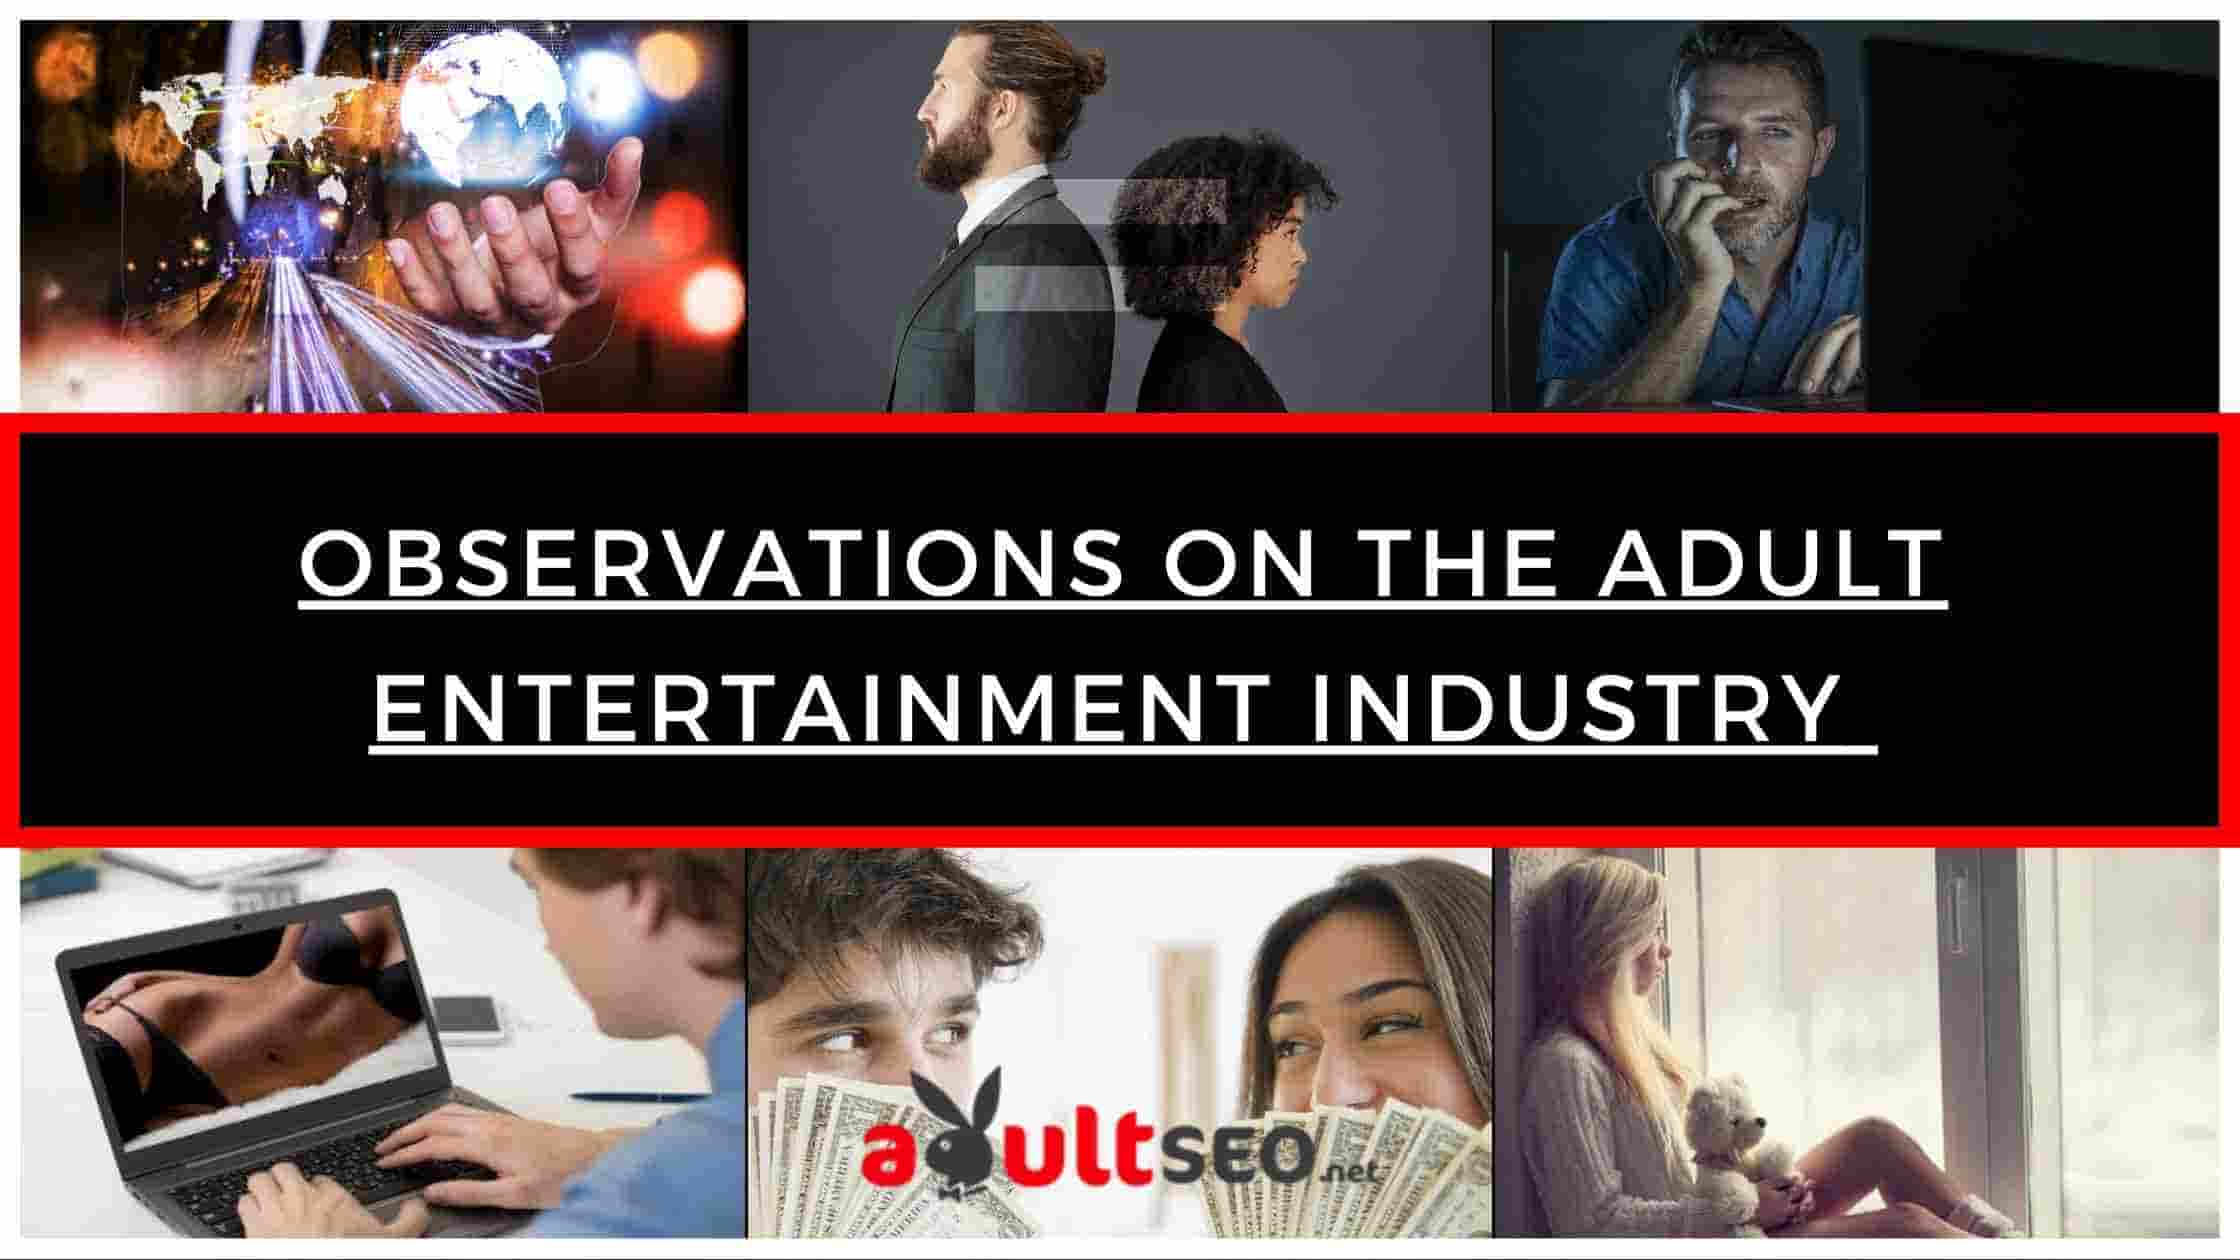 Observations on the Adult Entertainment Industry You May Not Have Heard Before